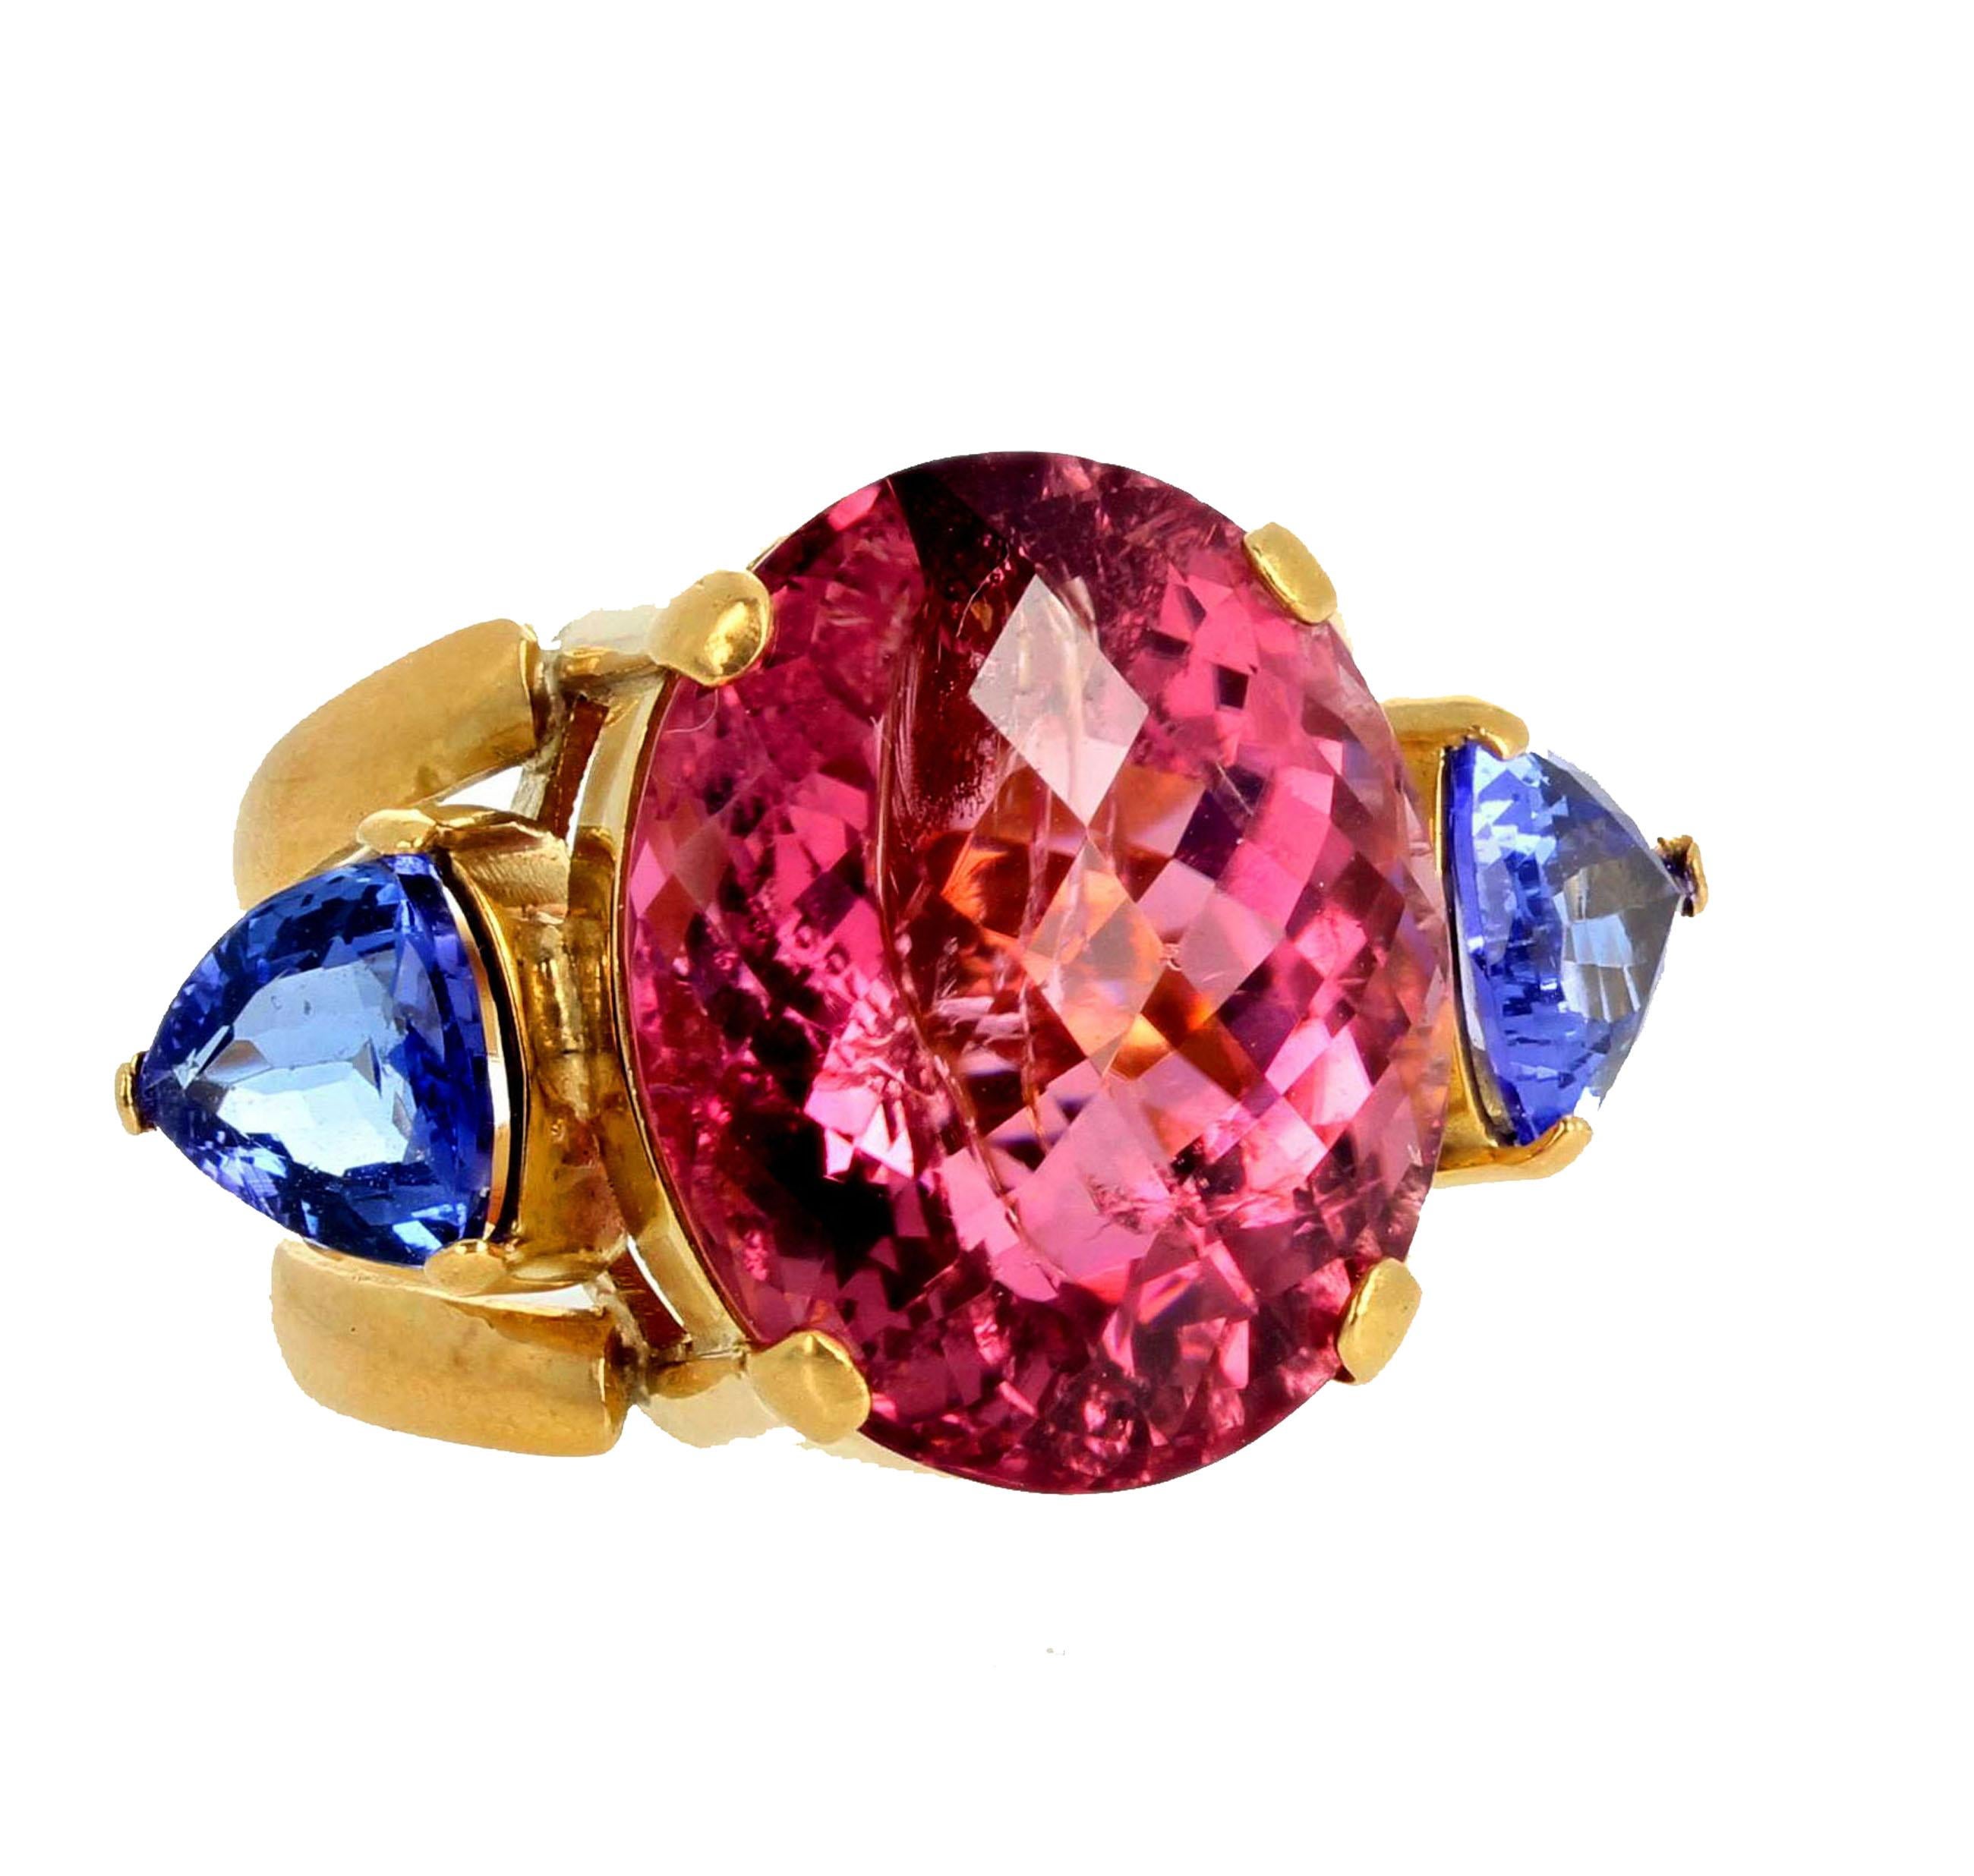 This extraordinary ring is a glittering intense pink checkerboard gemcut natural brilliant Tourmaline enhanced with 1 Ct each of natural Tanzanite trillions set in this 18Kt yellow gold ring size 7 (sizable).  This magnificent ring sits high on the